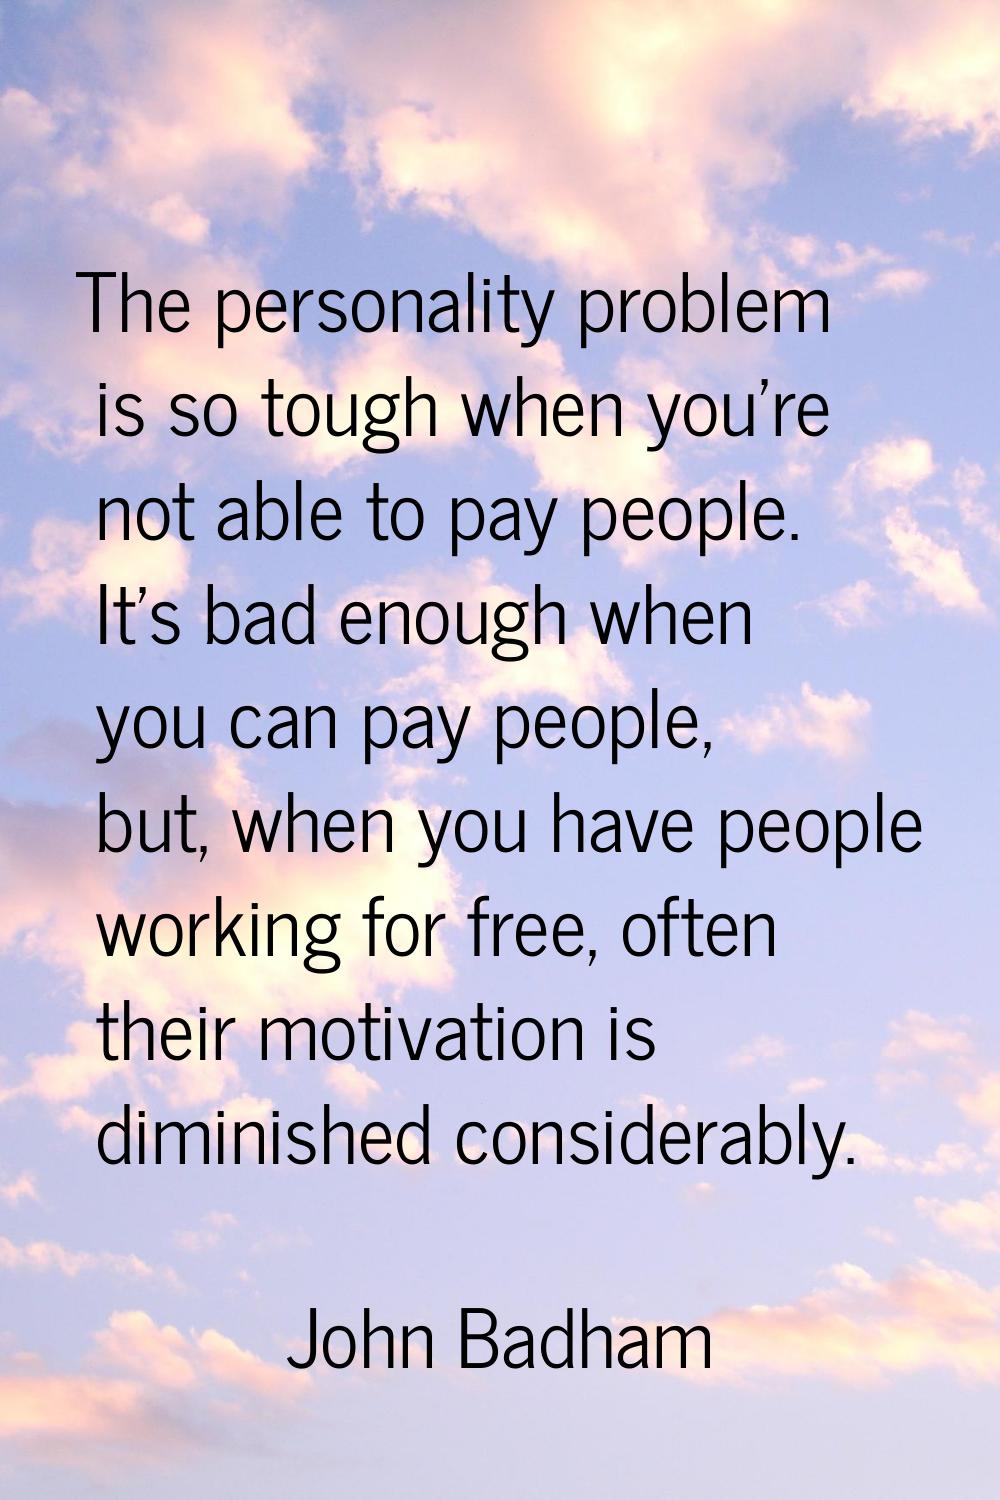 The personality problem is so tough when you're not able to pay people. It's bad enough when you ca